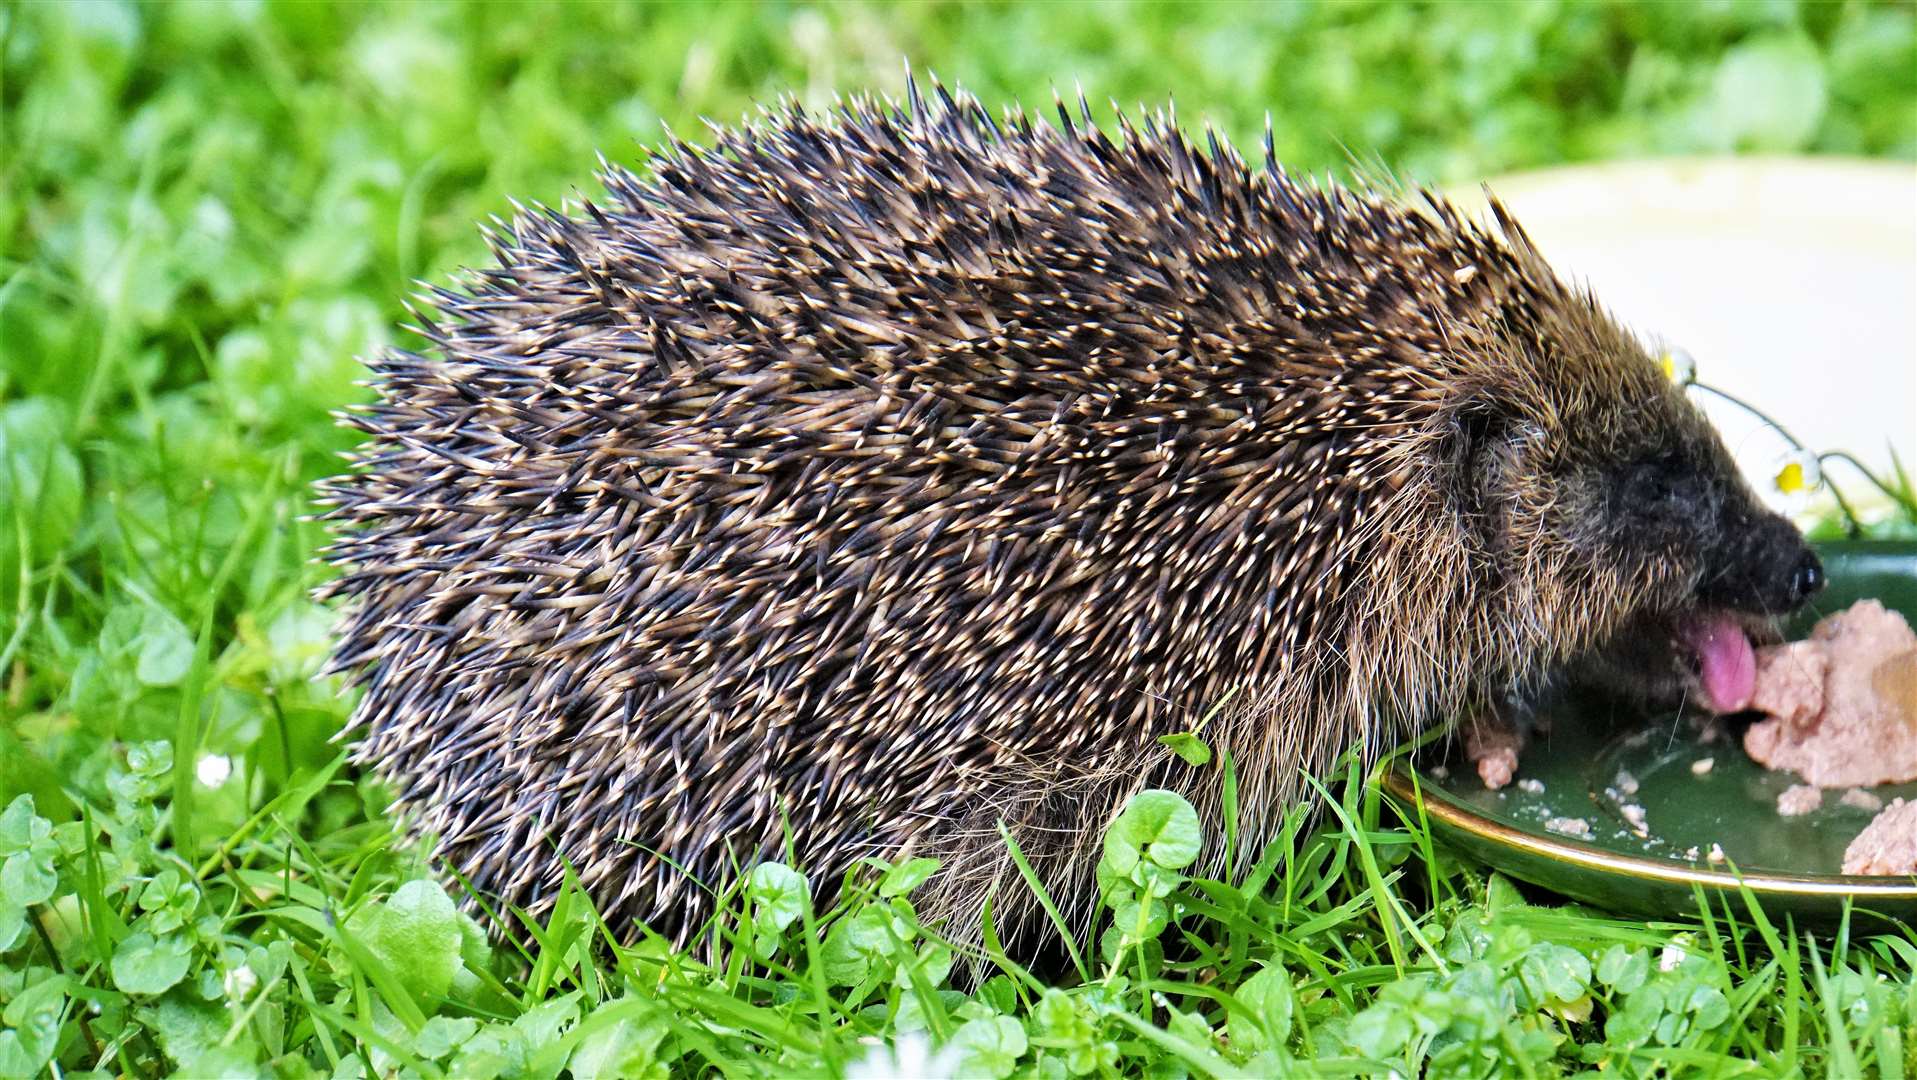 The hedgehog tucks into some dog food and is back to full health now.